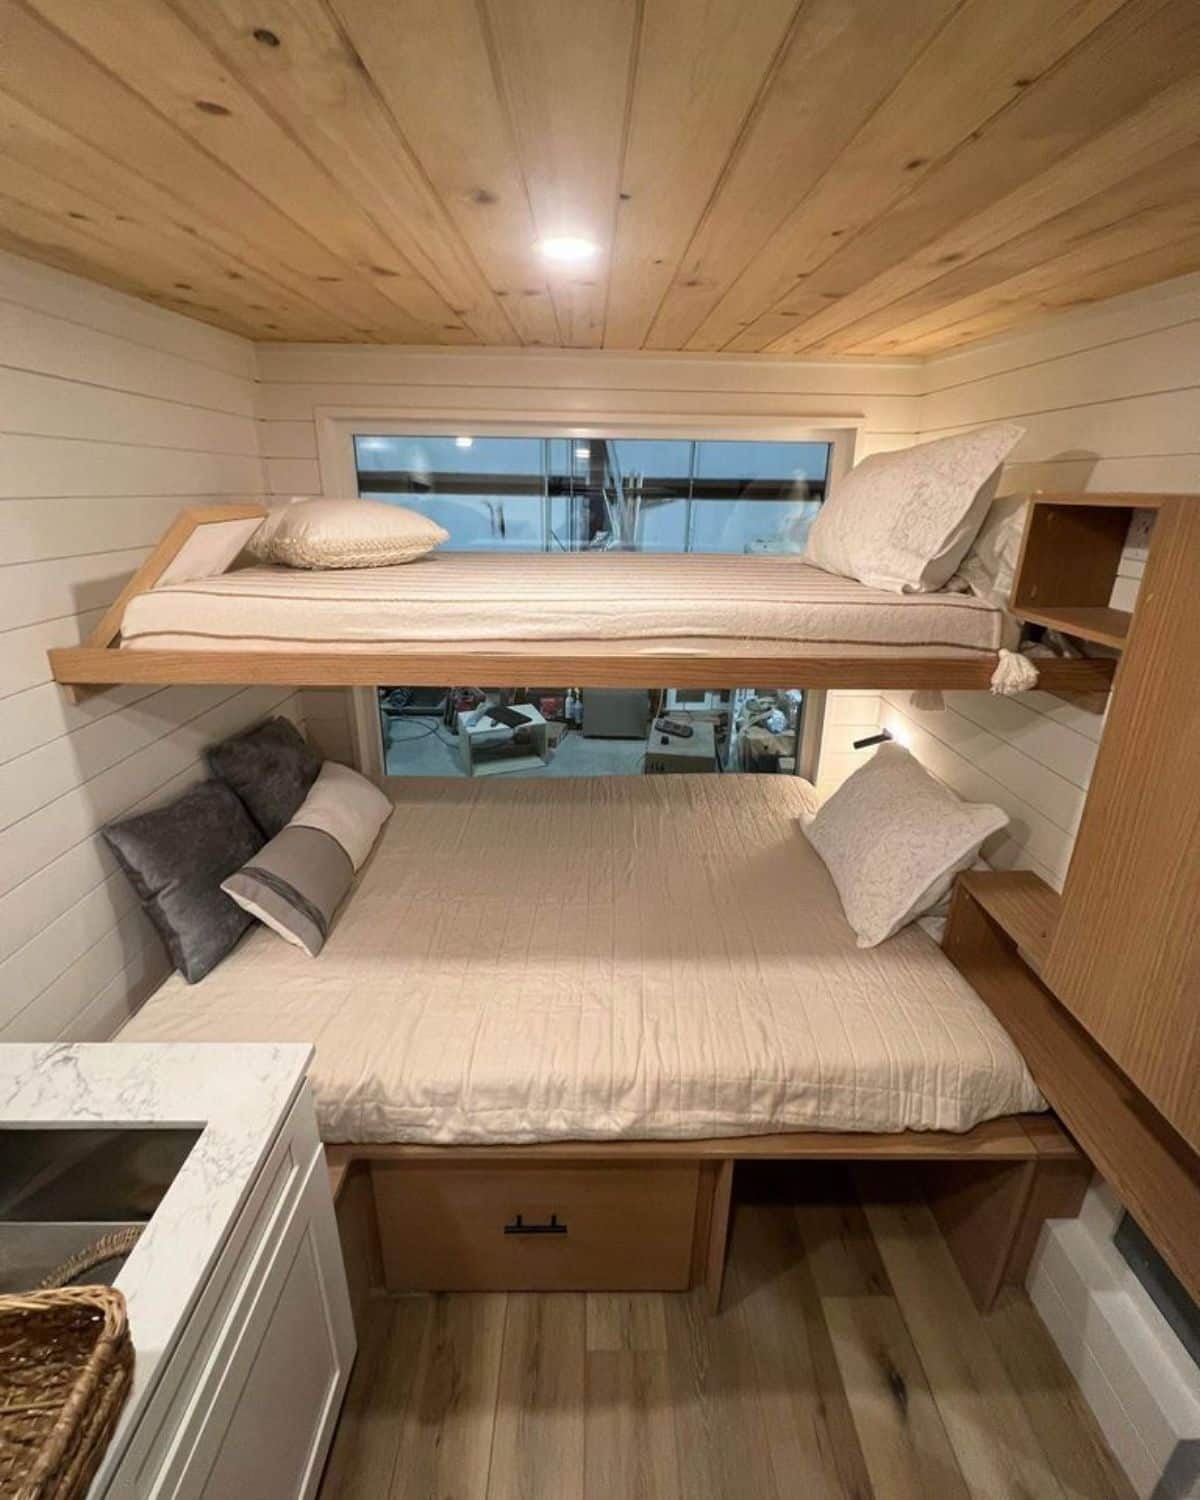 Double bunk bed makes the perfect tiny room on wheels so adorable and stunning